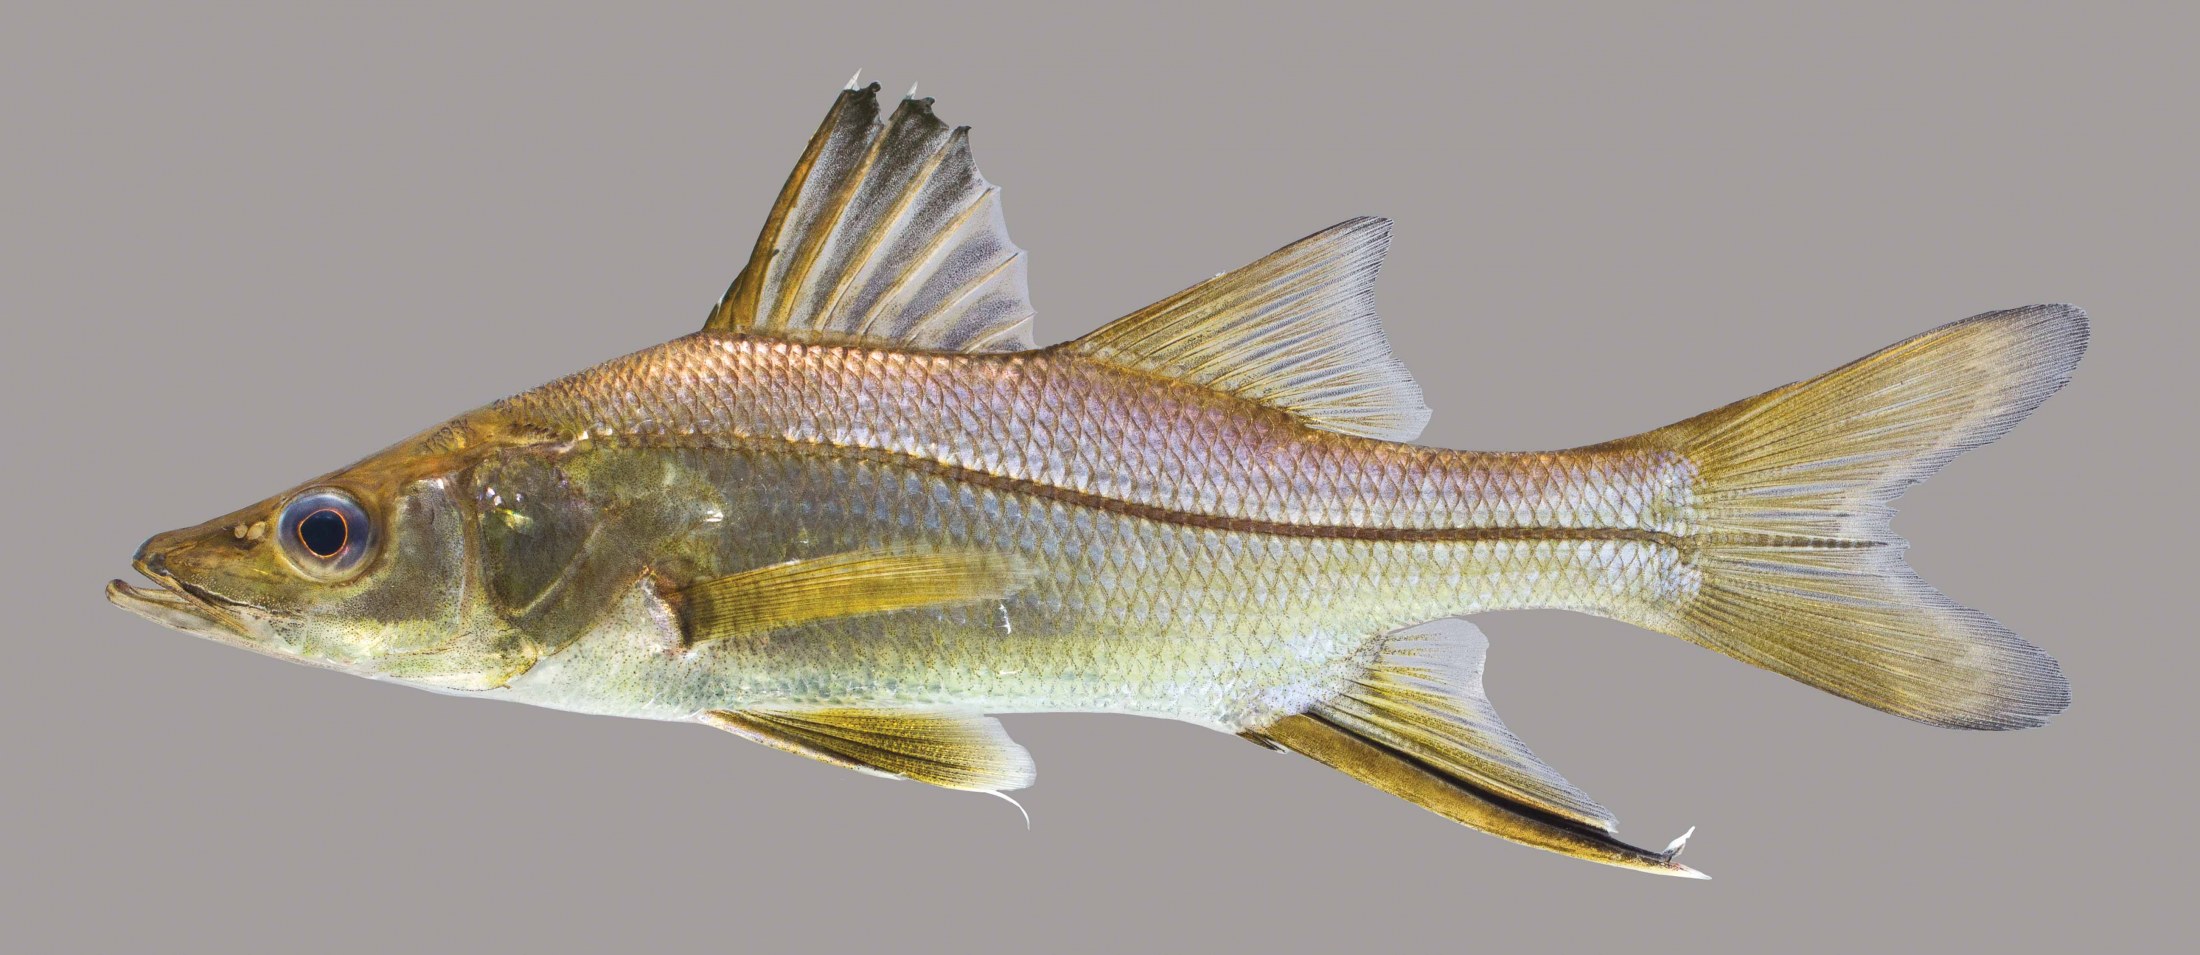 Lateral view of a swordspine snook